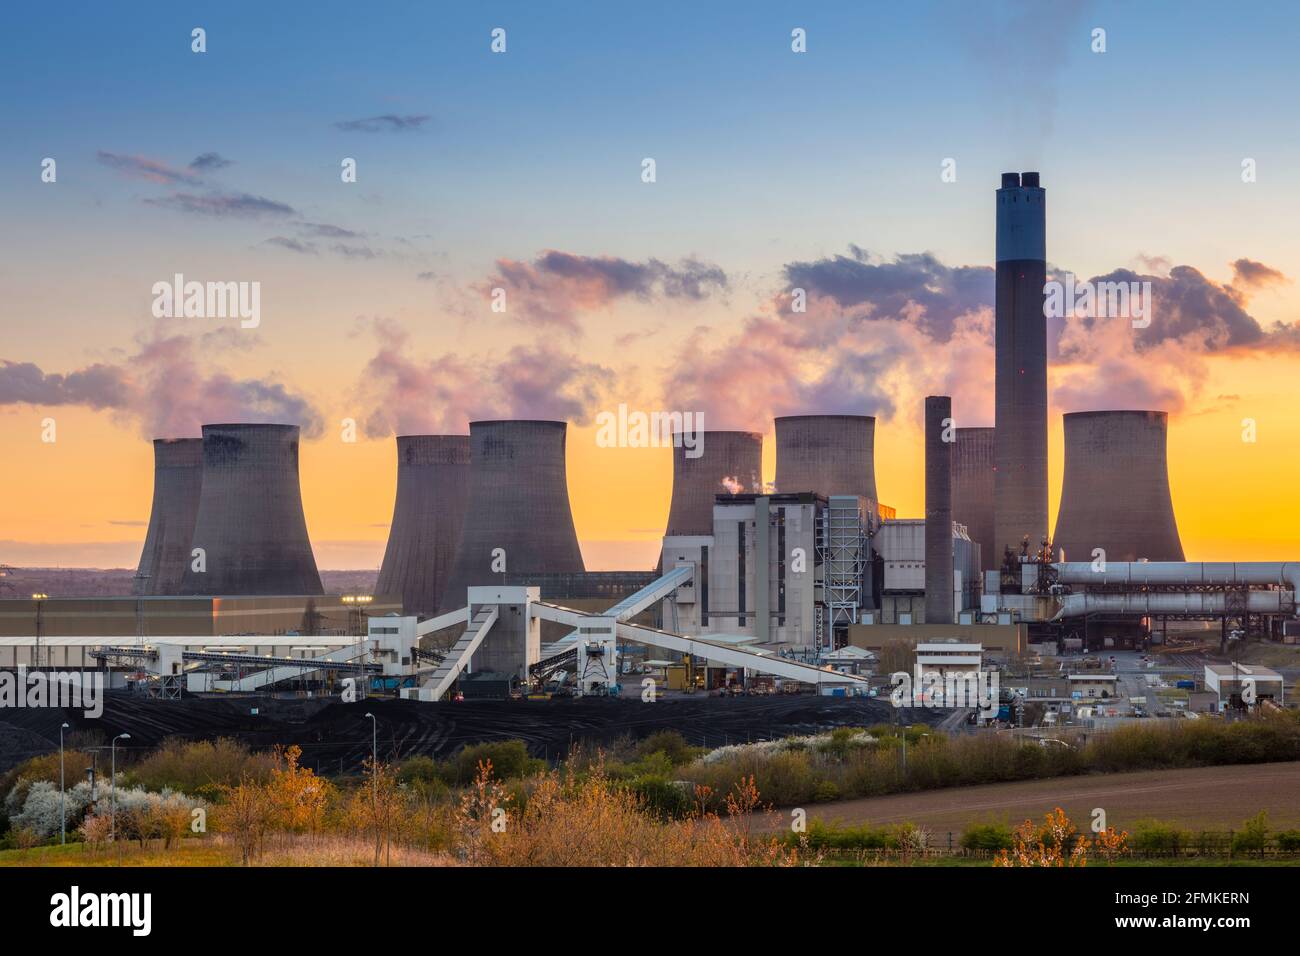 Ratcliffe-on-Soar coal power station with steam from the cooling towers at sunset Ratcliffe on soar Nottinghamshire England UK GB Europe Stock Photo